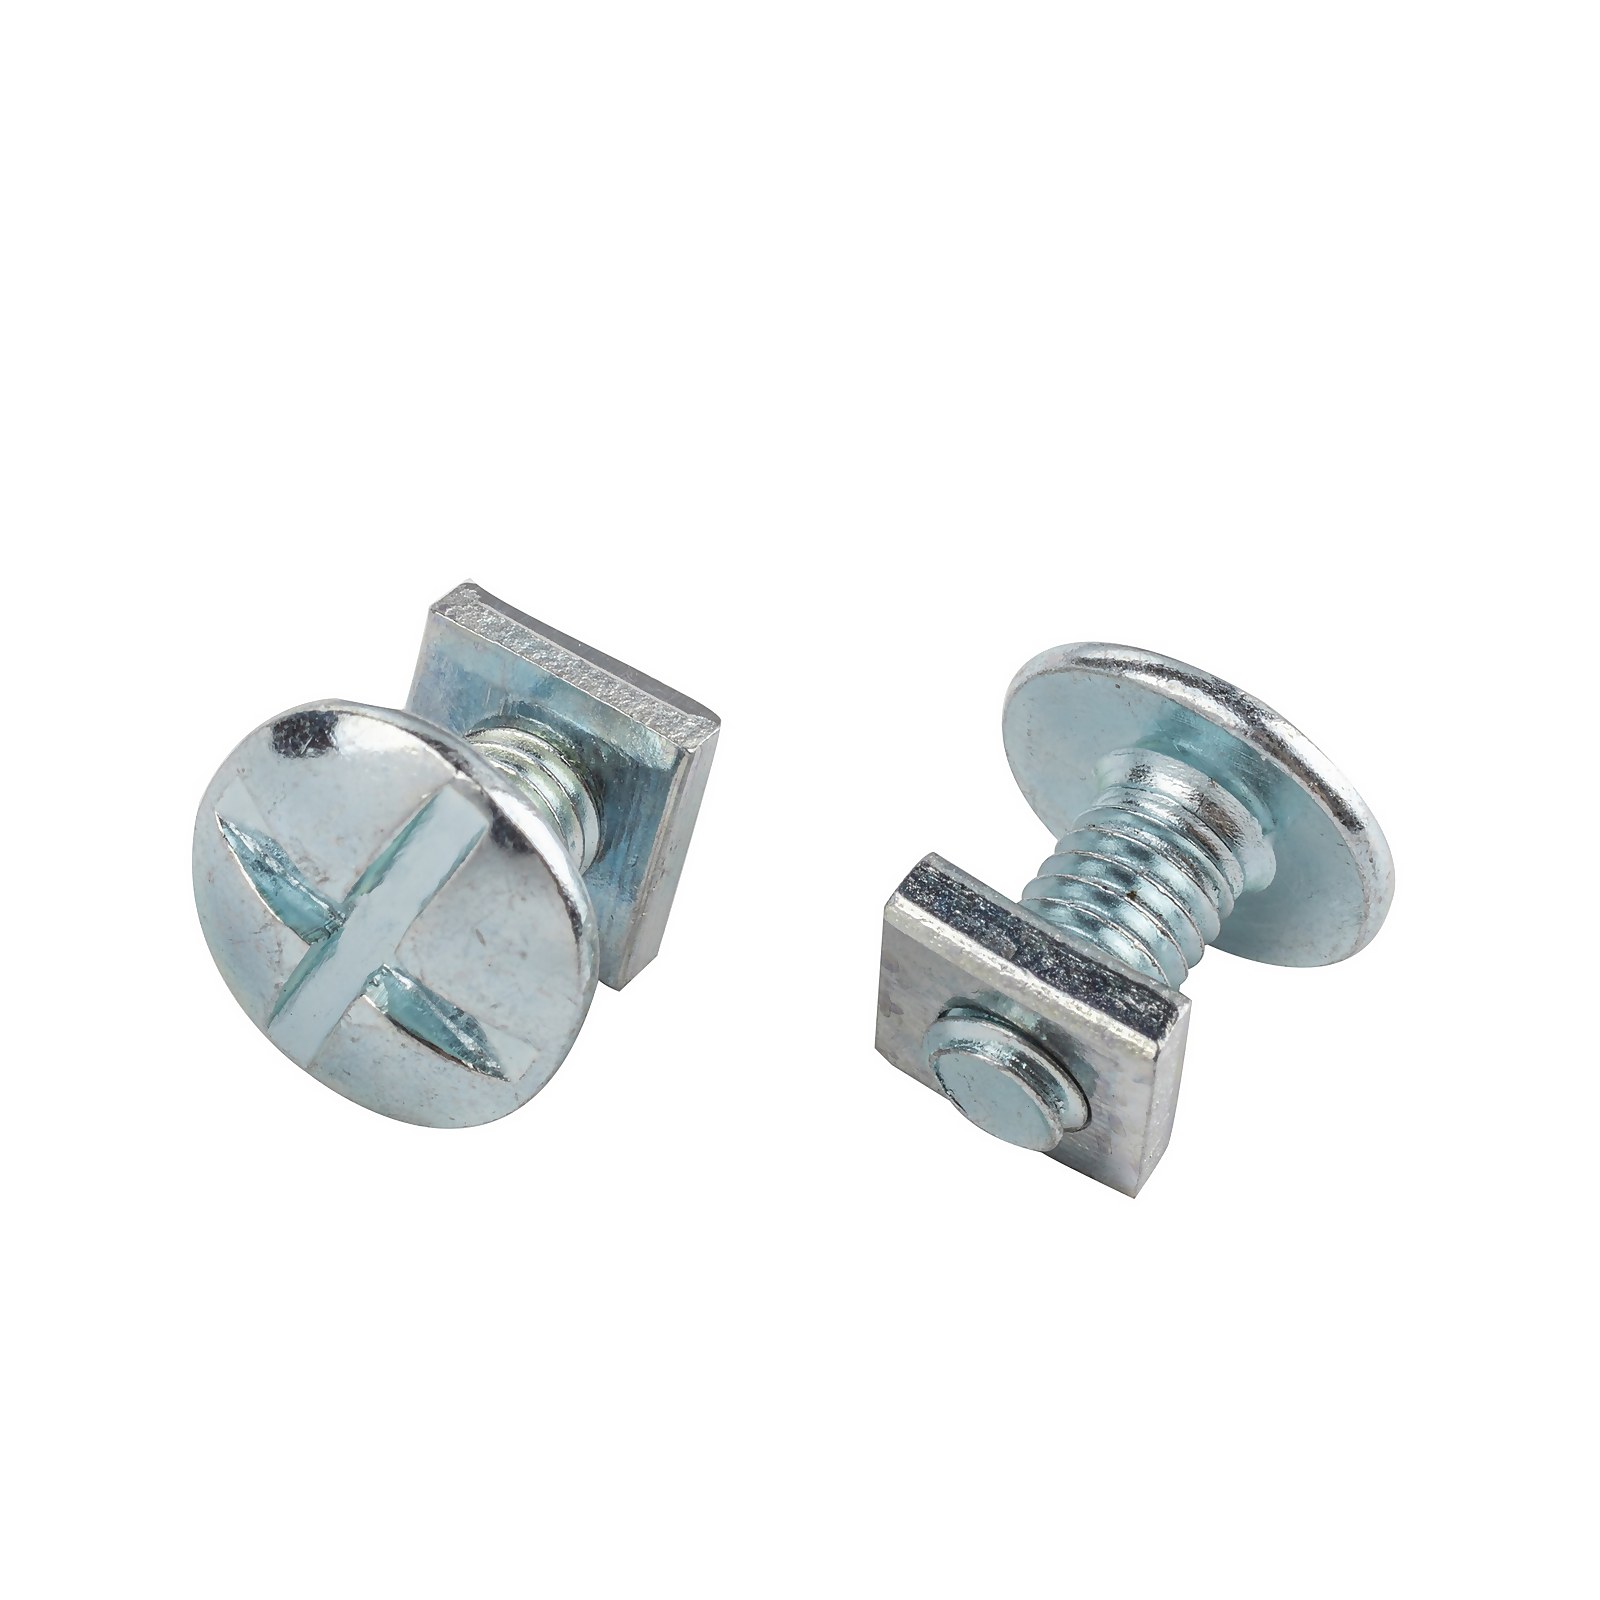 Photo of Homebase Zinc Plated Roof Bolt M6 12mm 10 Pack